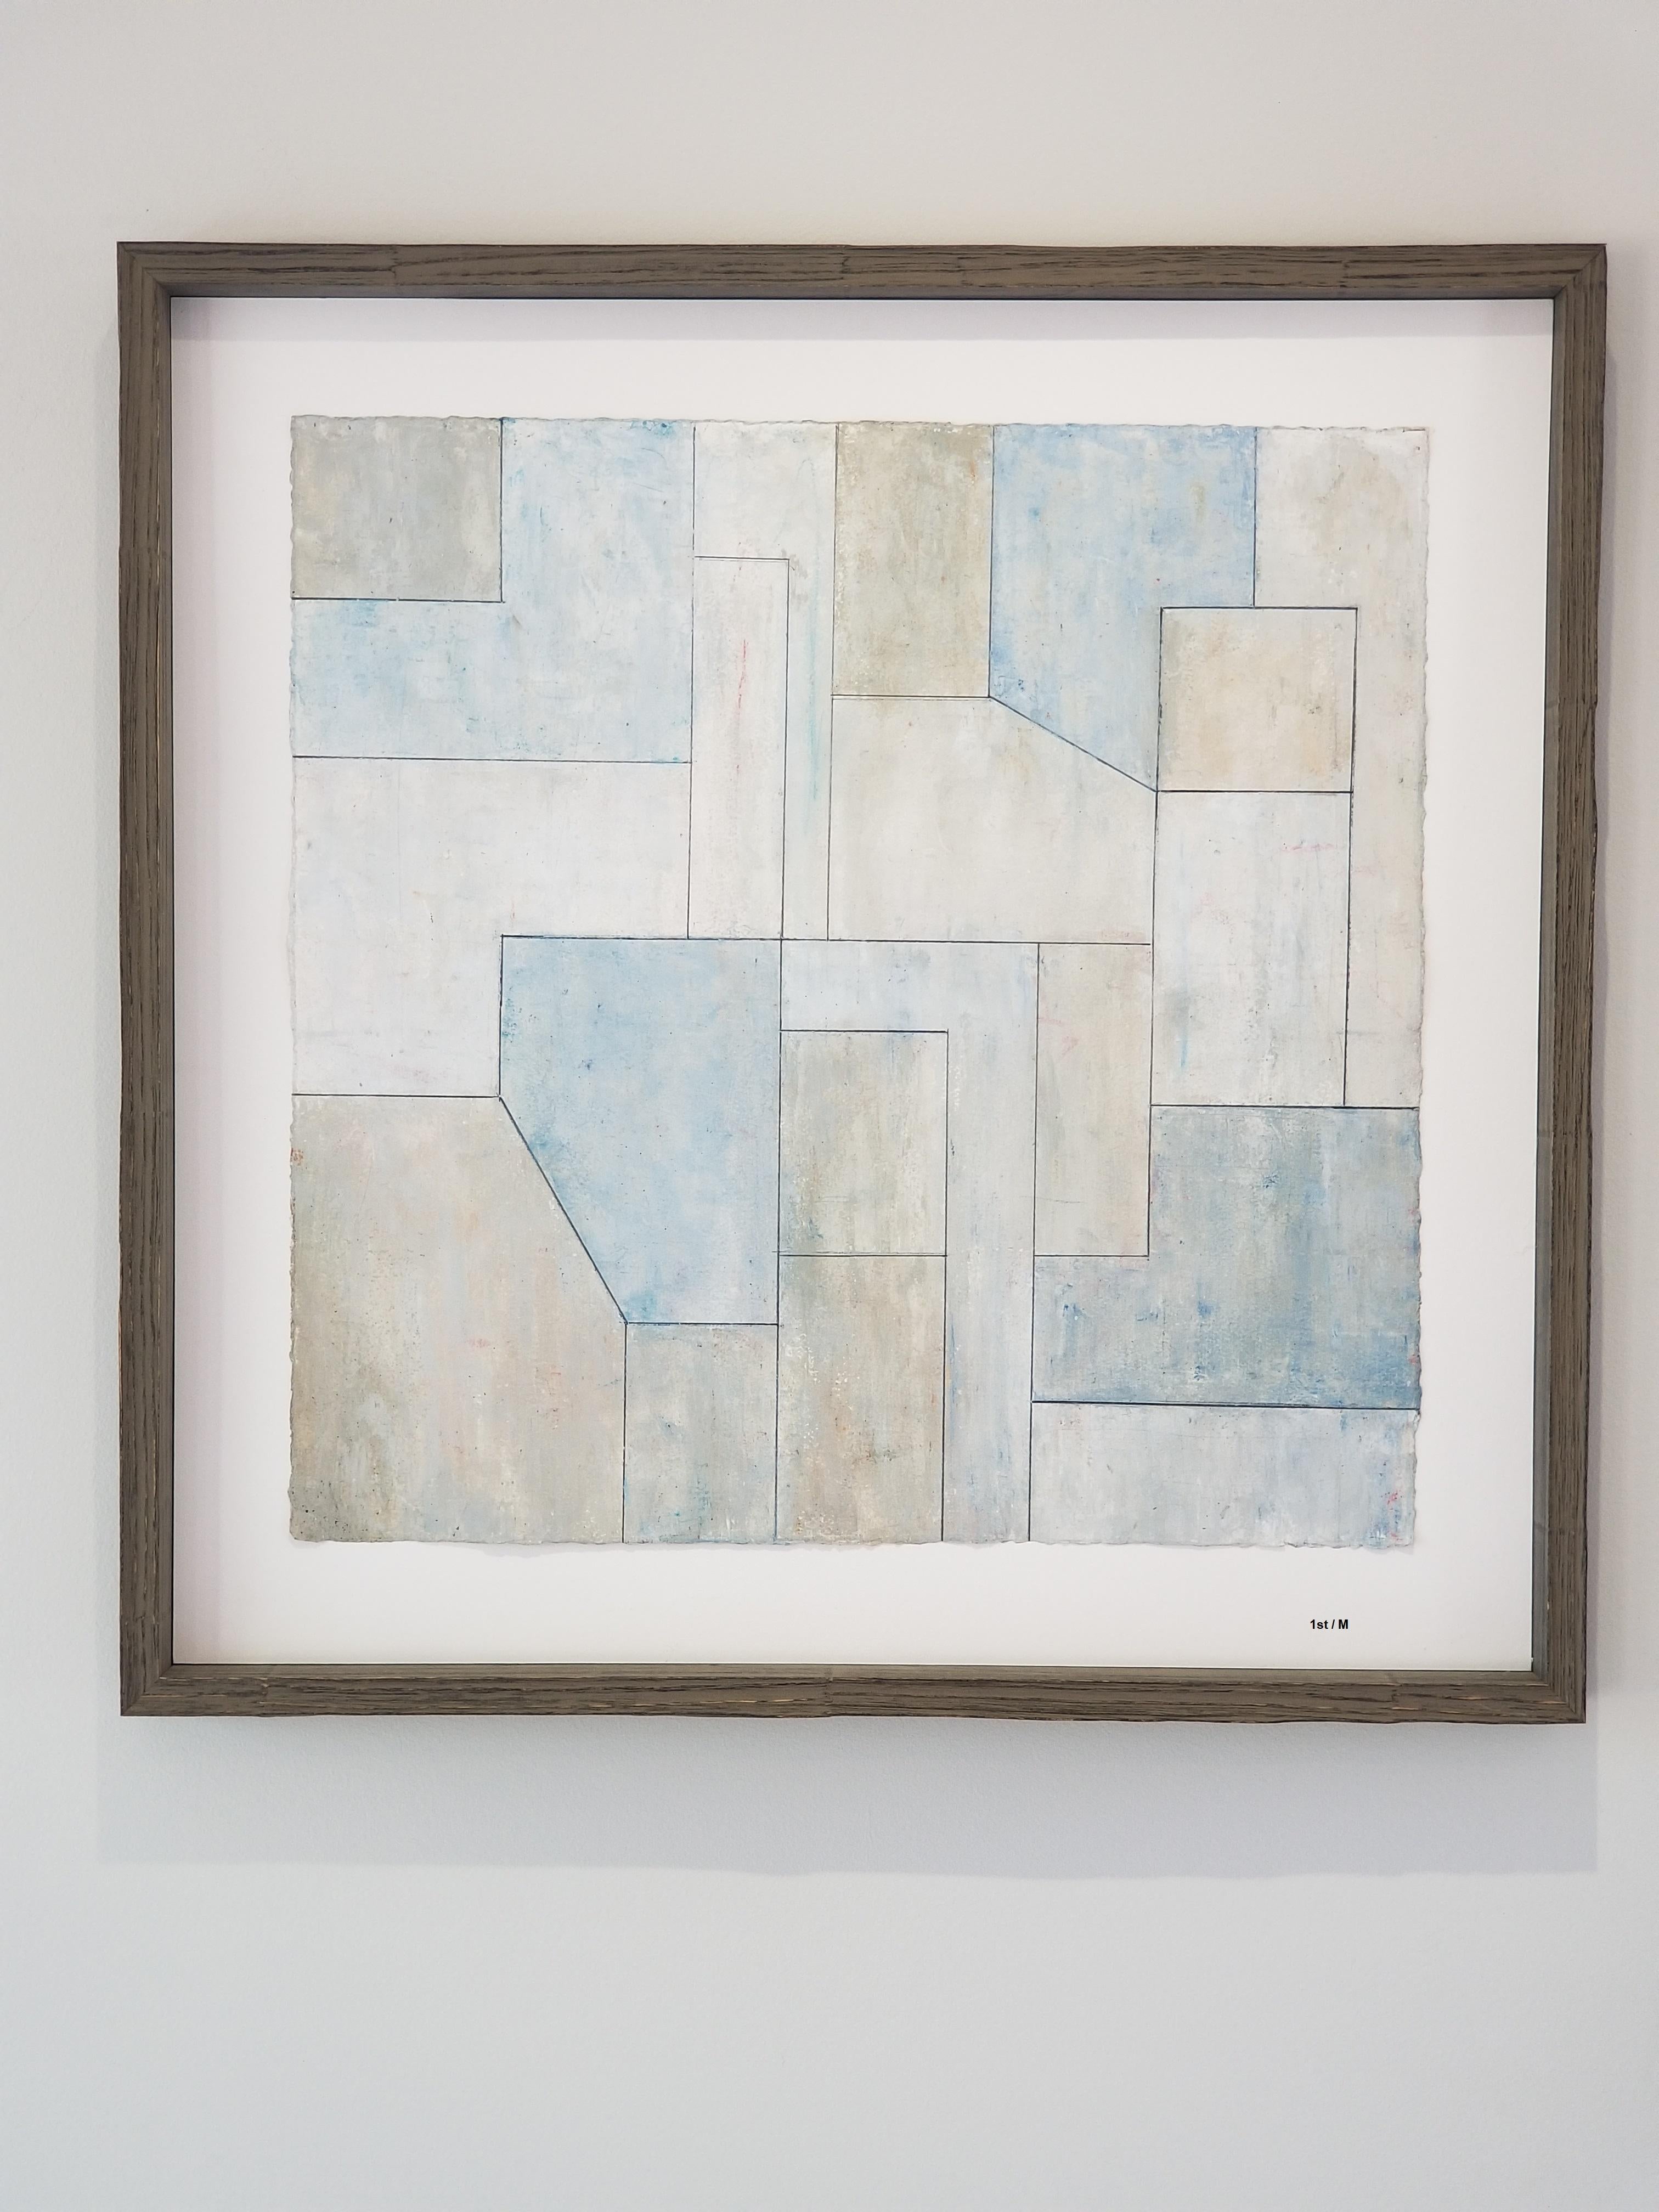 Stephen Cimini Abstract Painting - Oil painting on paper - framed in natural wood - Blue and Gray 1